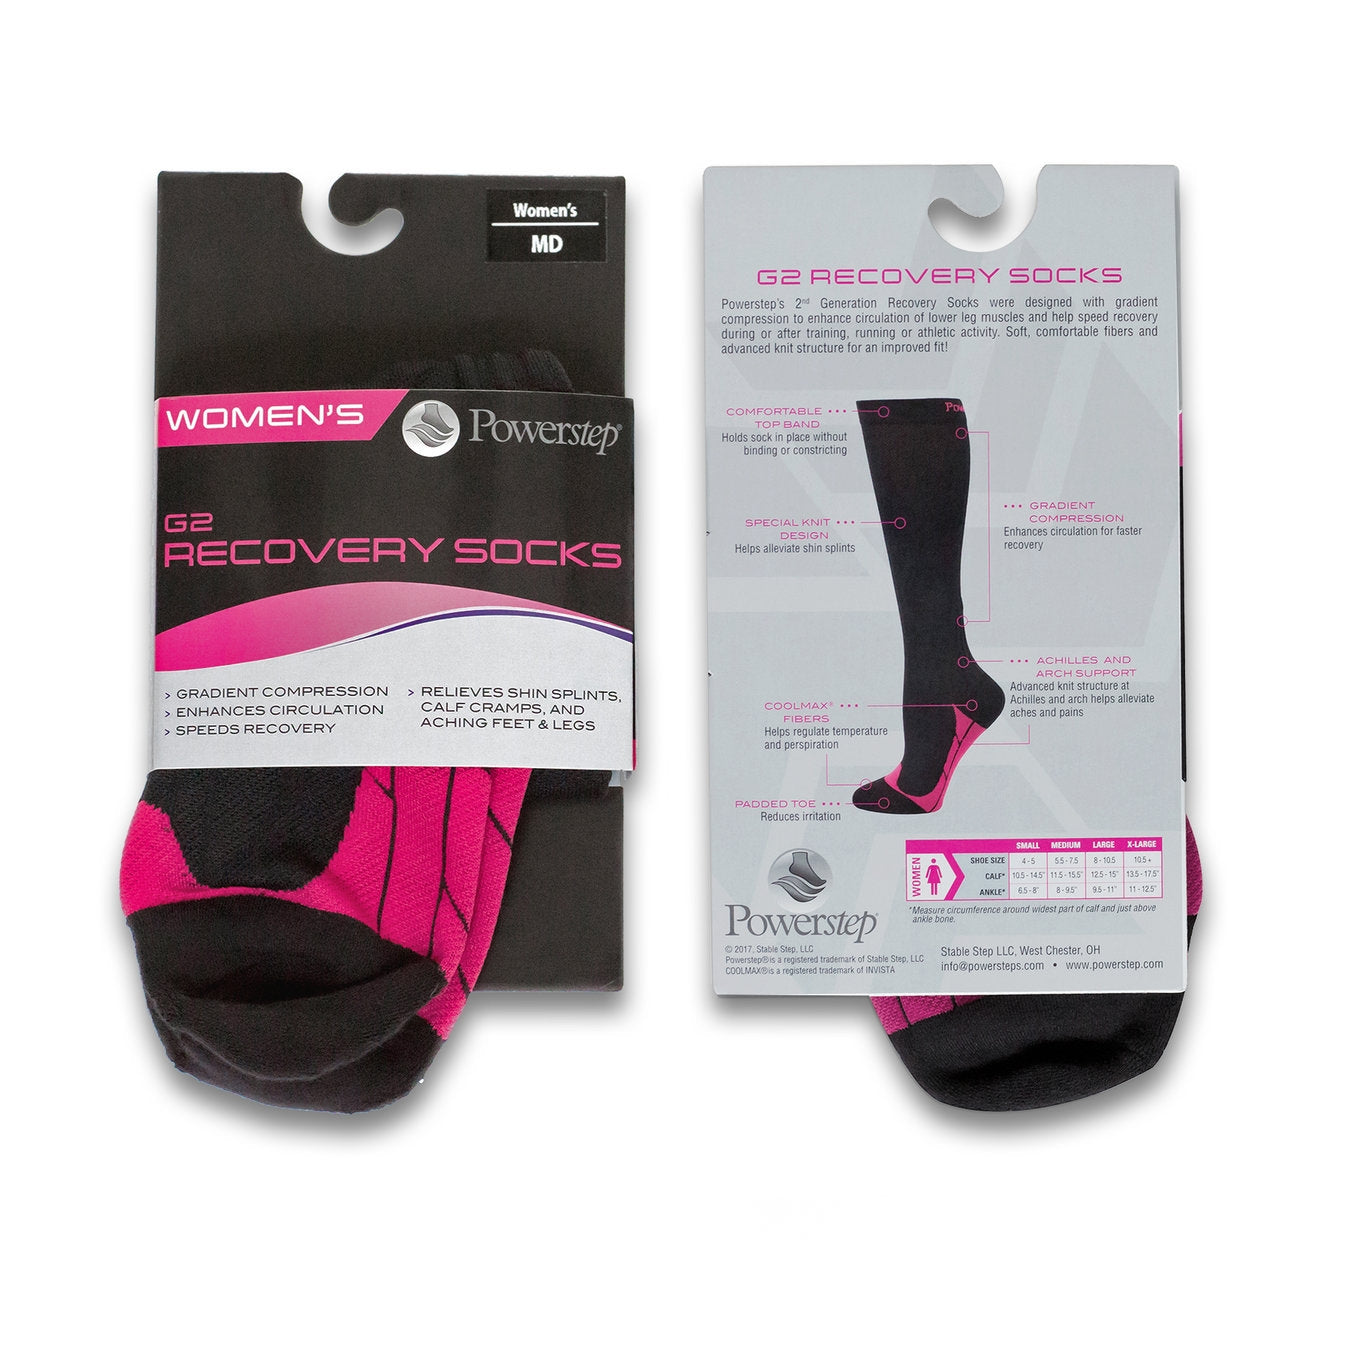 Powerstep G2 Compression Socks - Black and Pink - Small: Women's 4-5